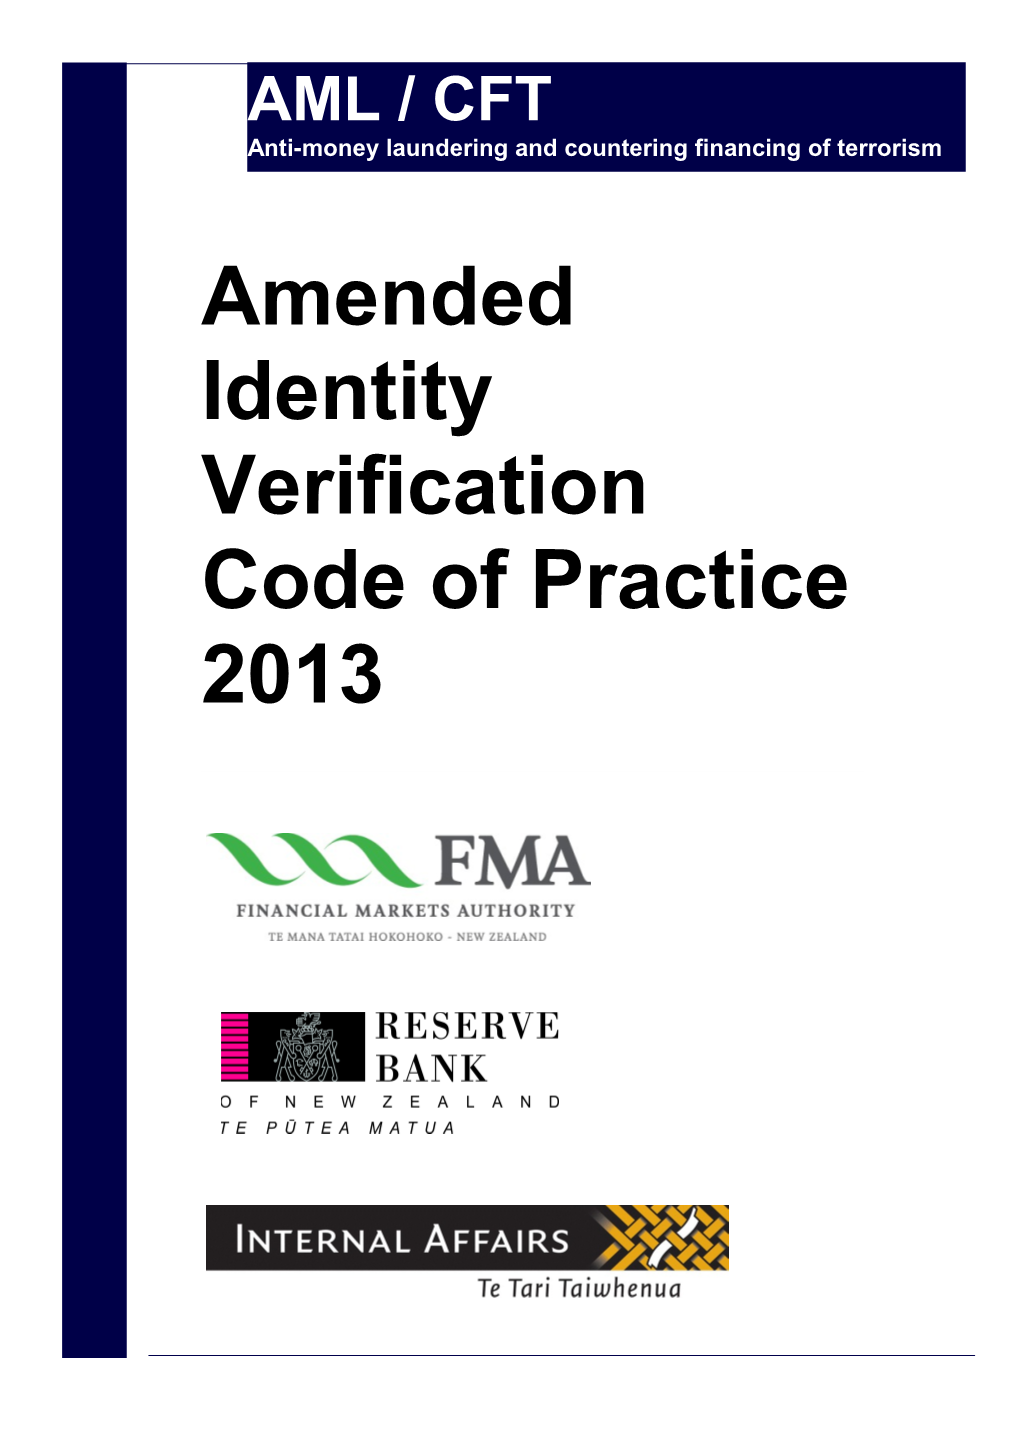 Amended Identity Verification Code of Practice 2013